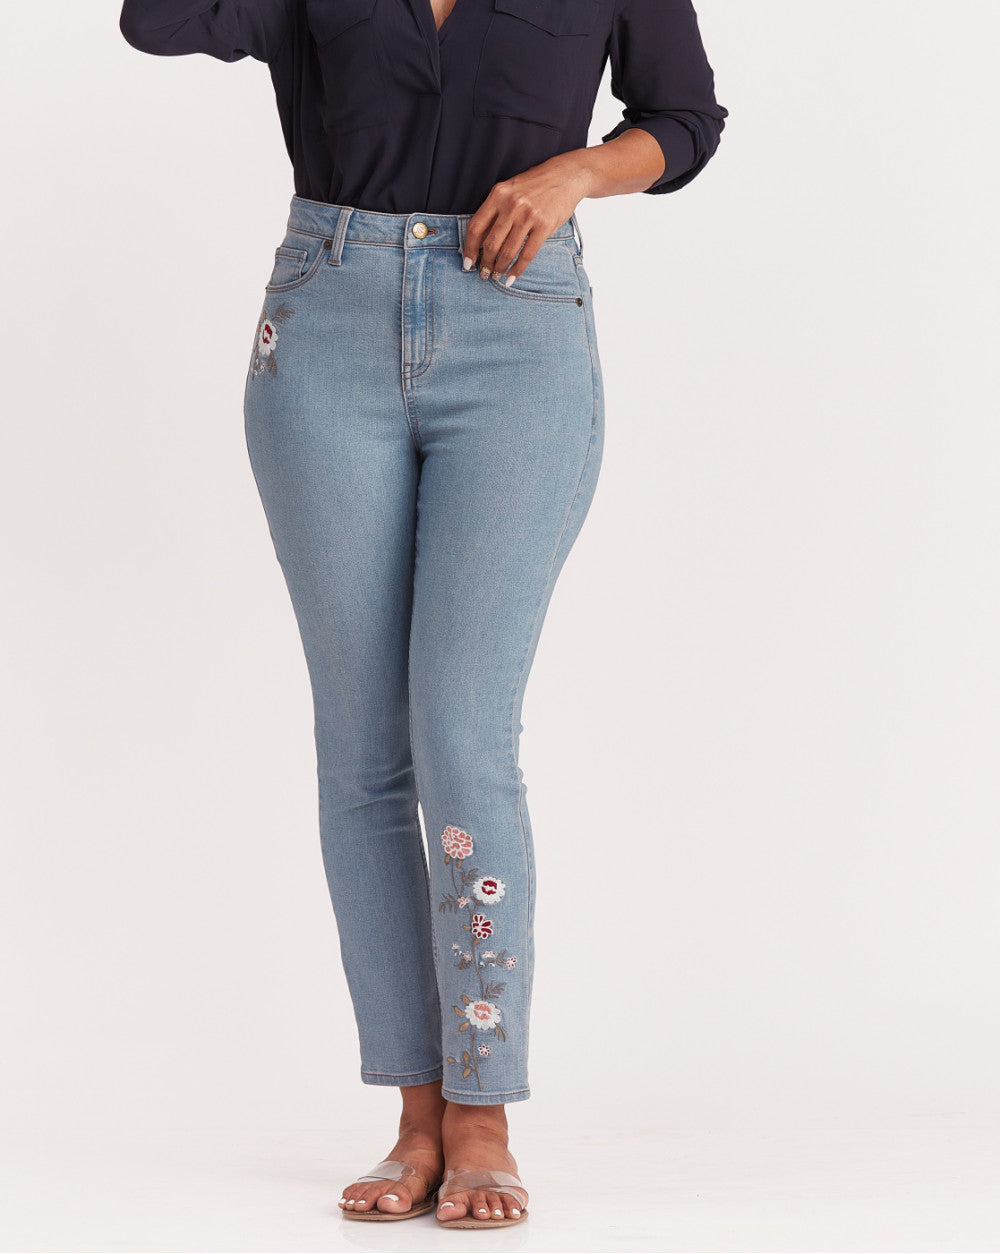 Skinny Fit, Floral Embroidered Jeans - Vapour Blue